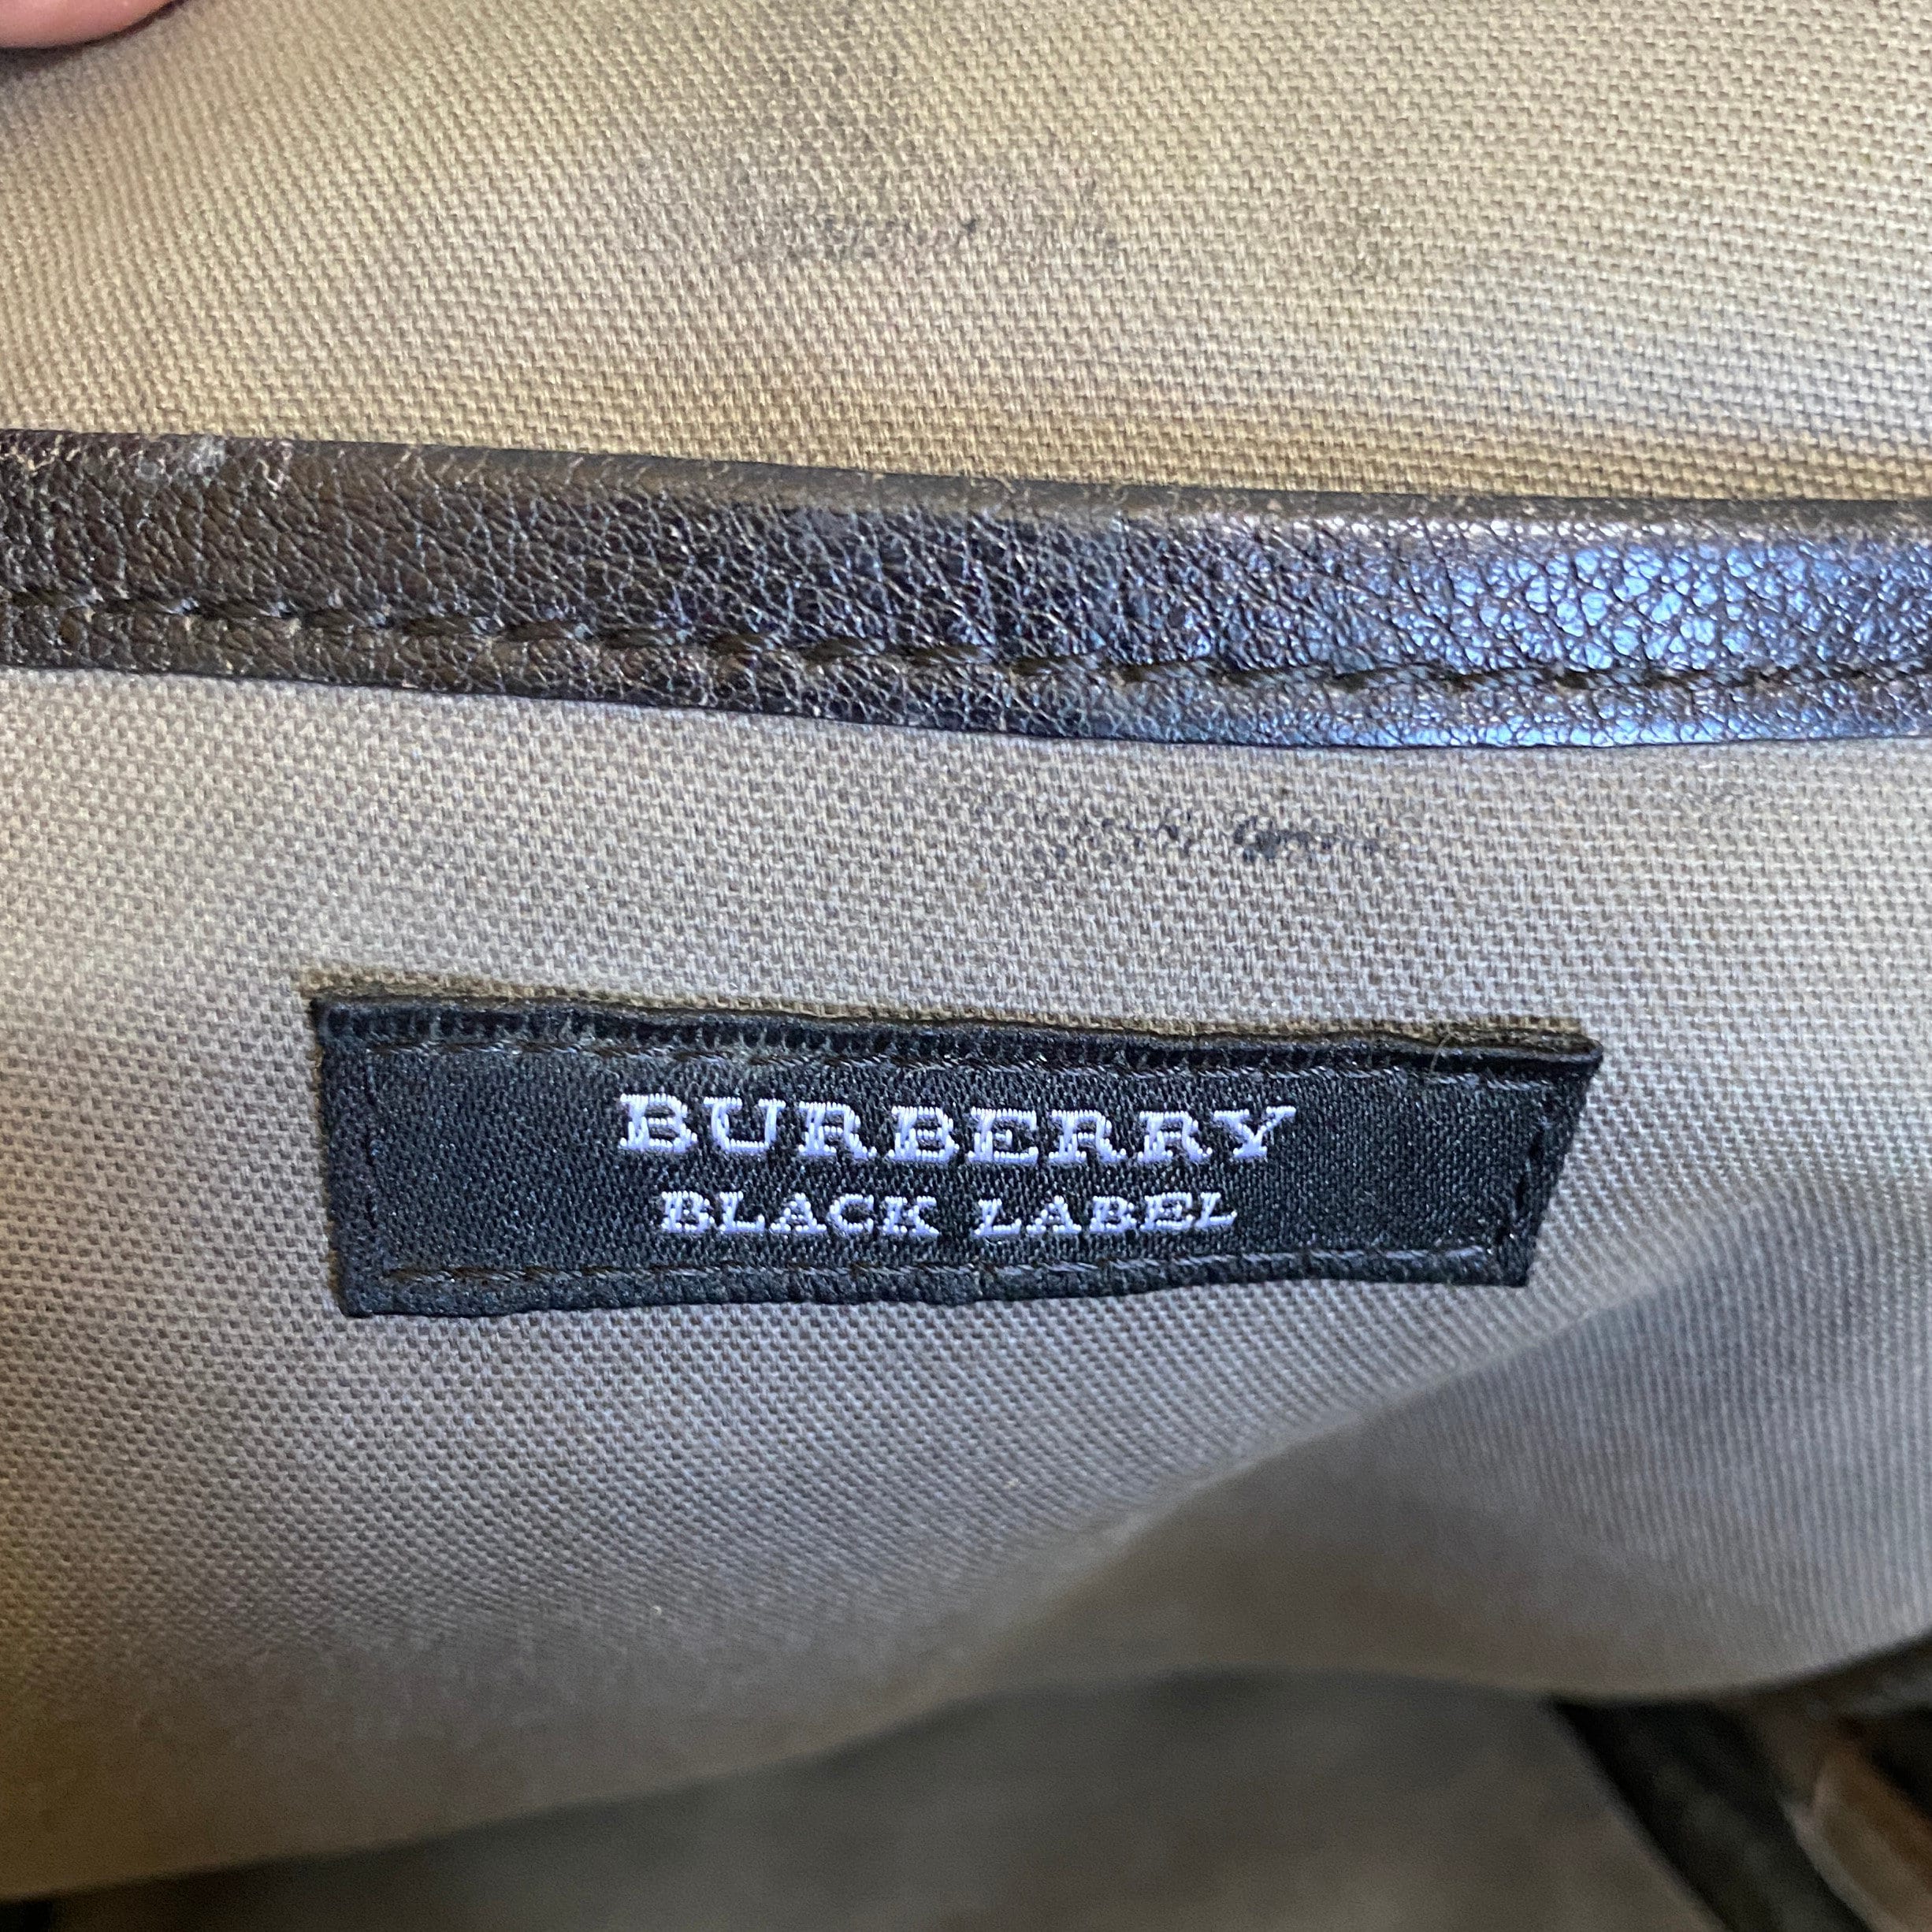 Burberry Bags for Sale *nt blue label though*